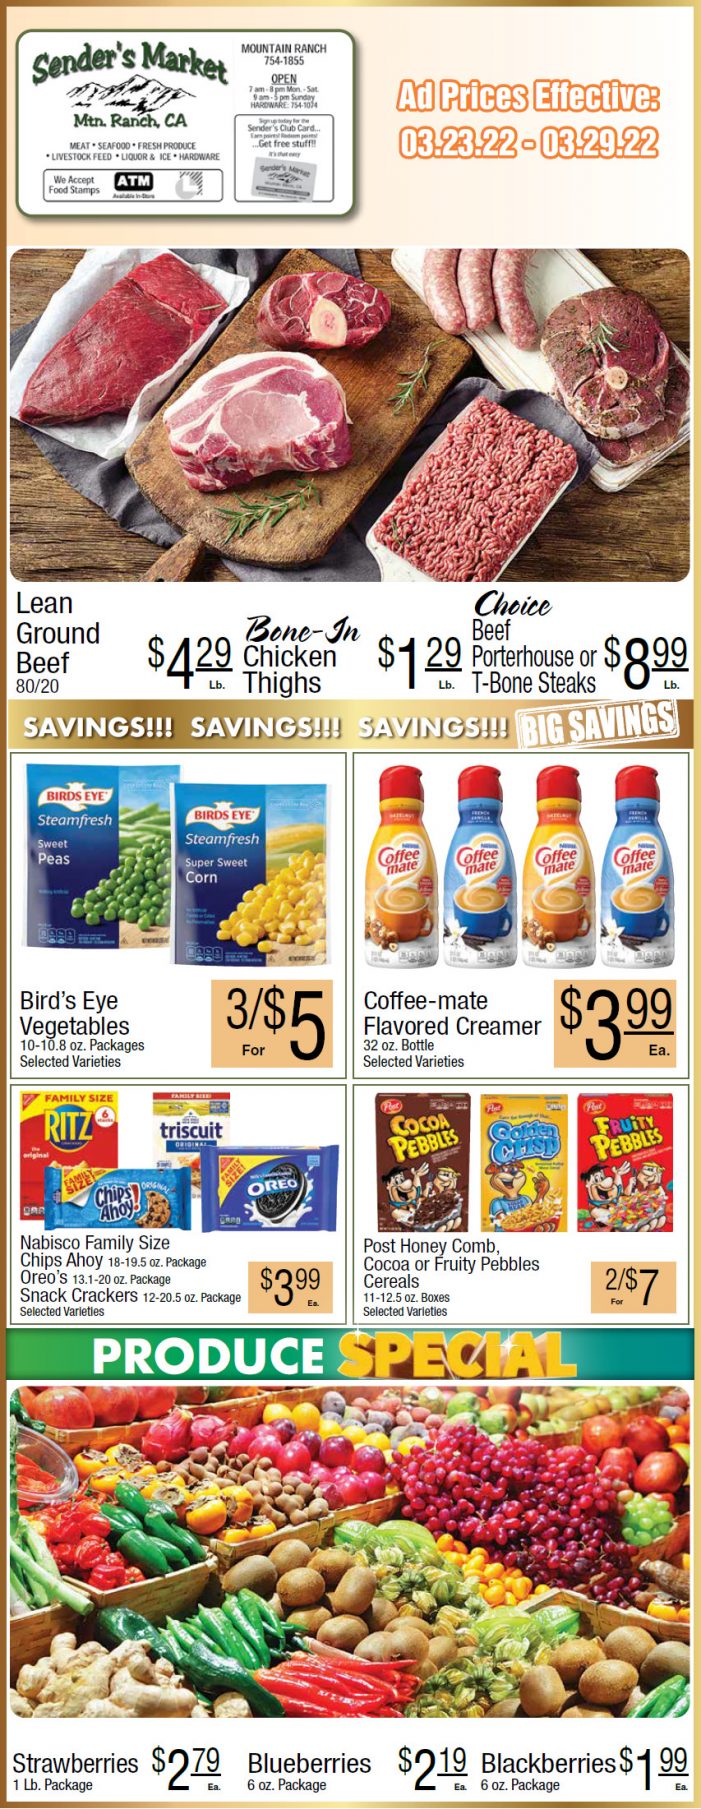 Sender’s Market’s Weekly Ad & Grocery Specials March 23rd ~ March 29th! Shop Local & Save!